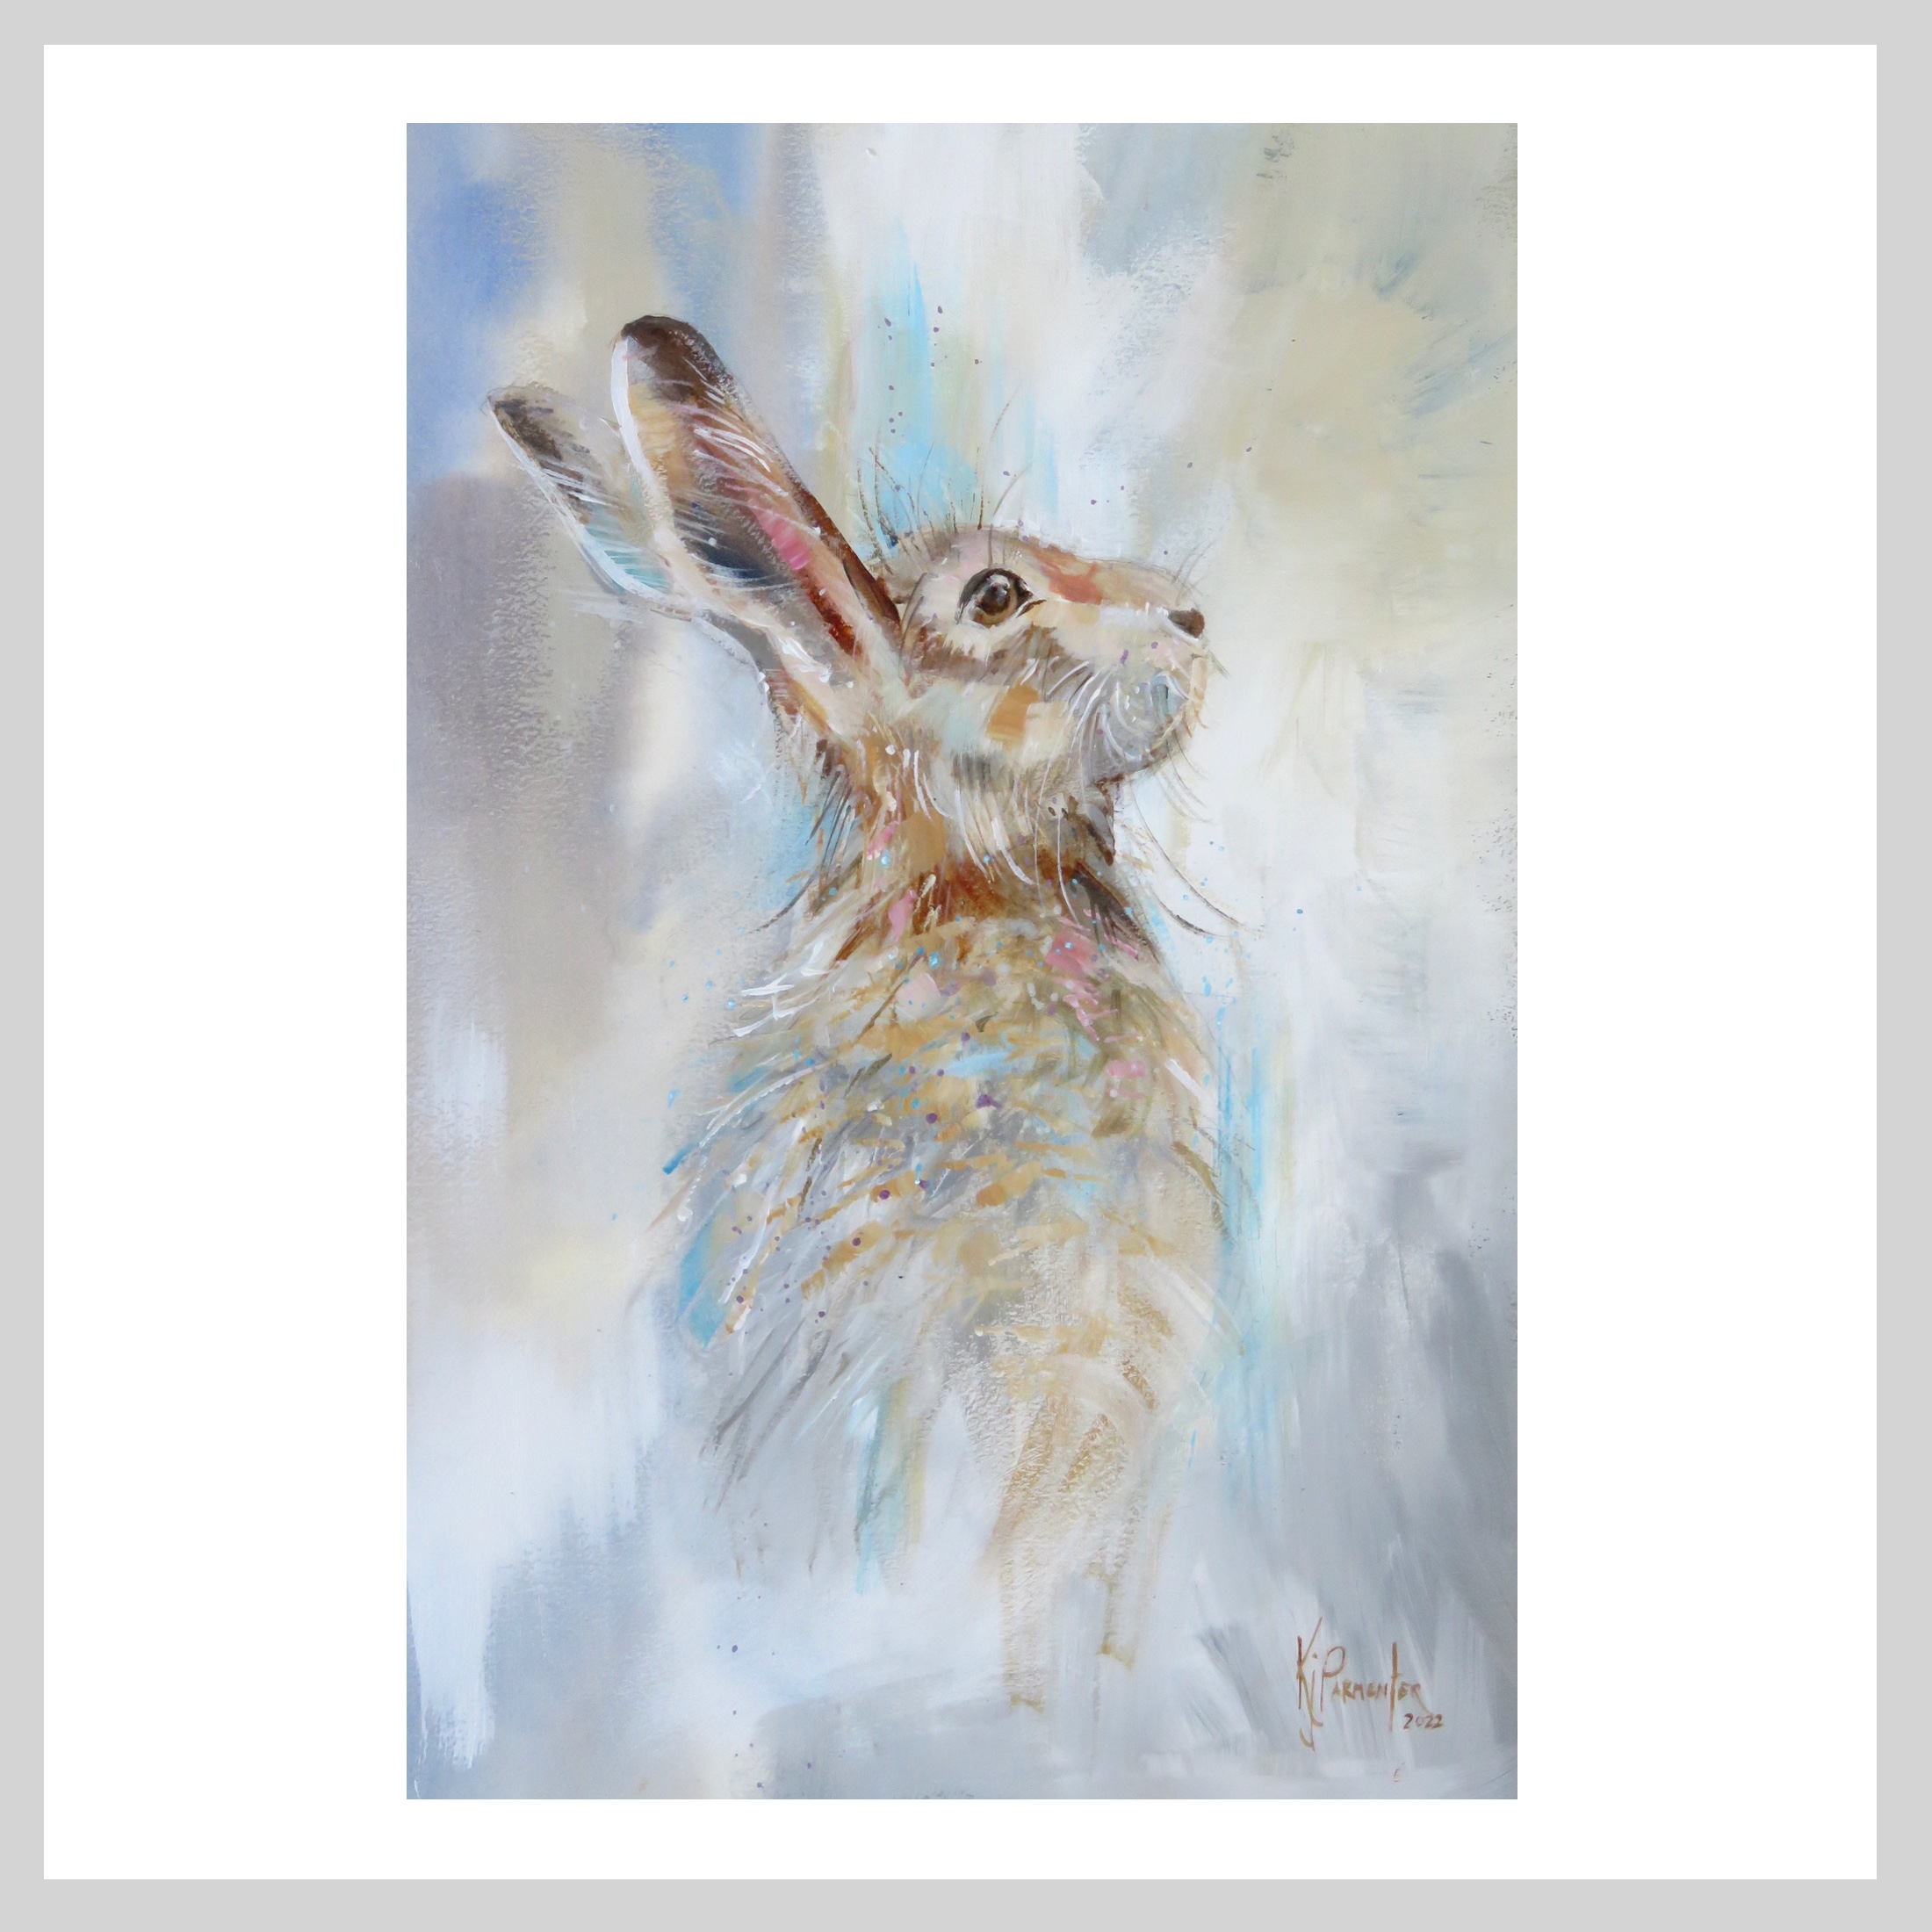 Something in the hare